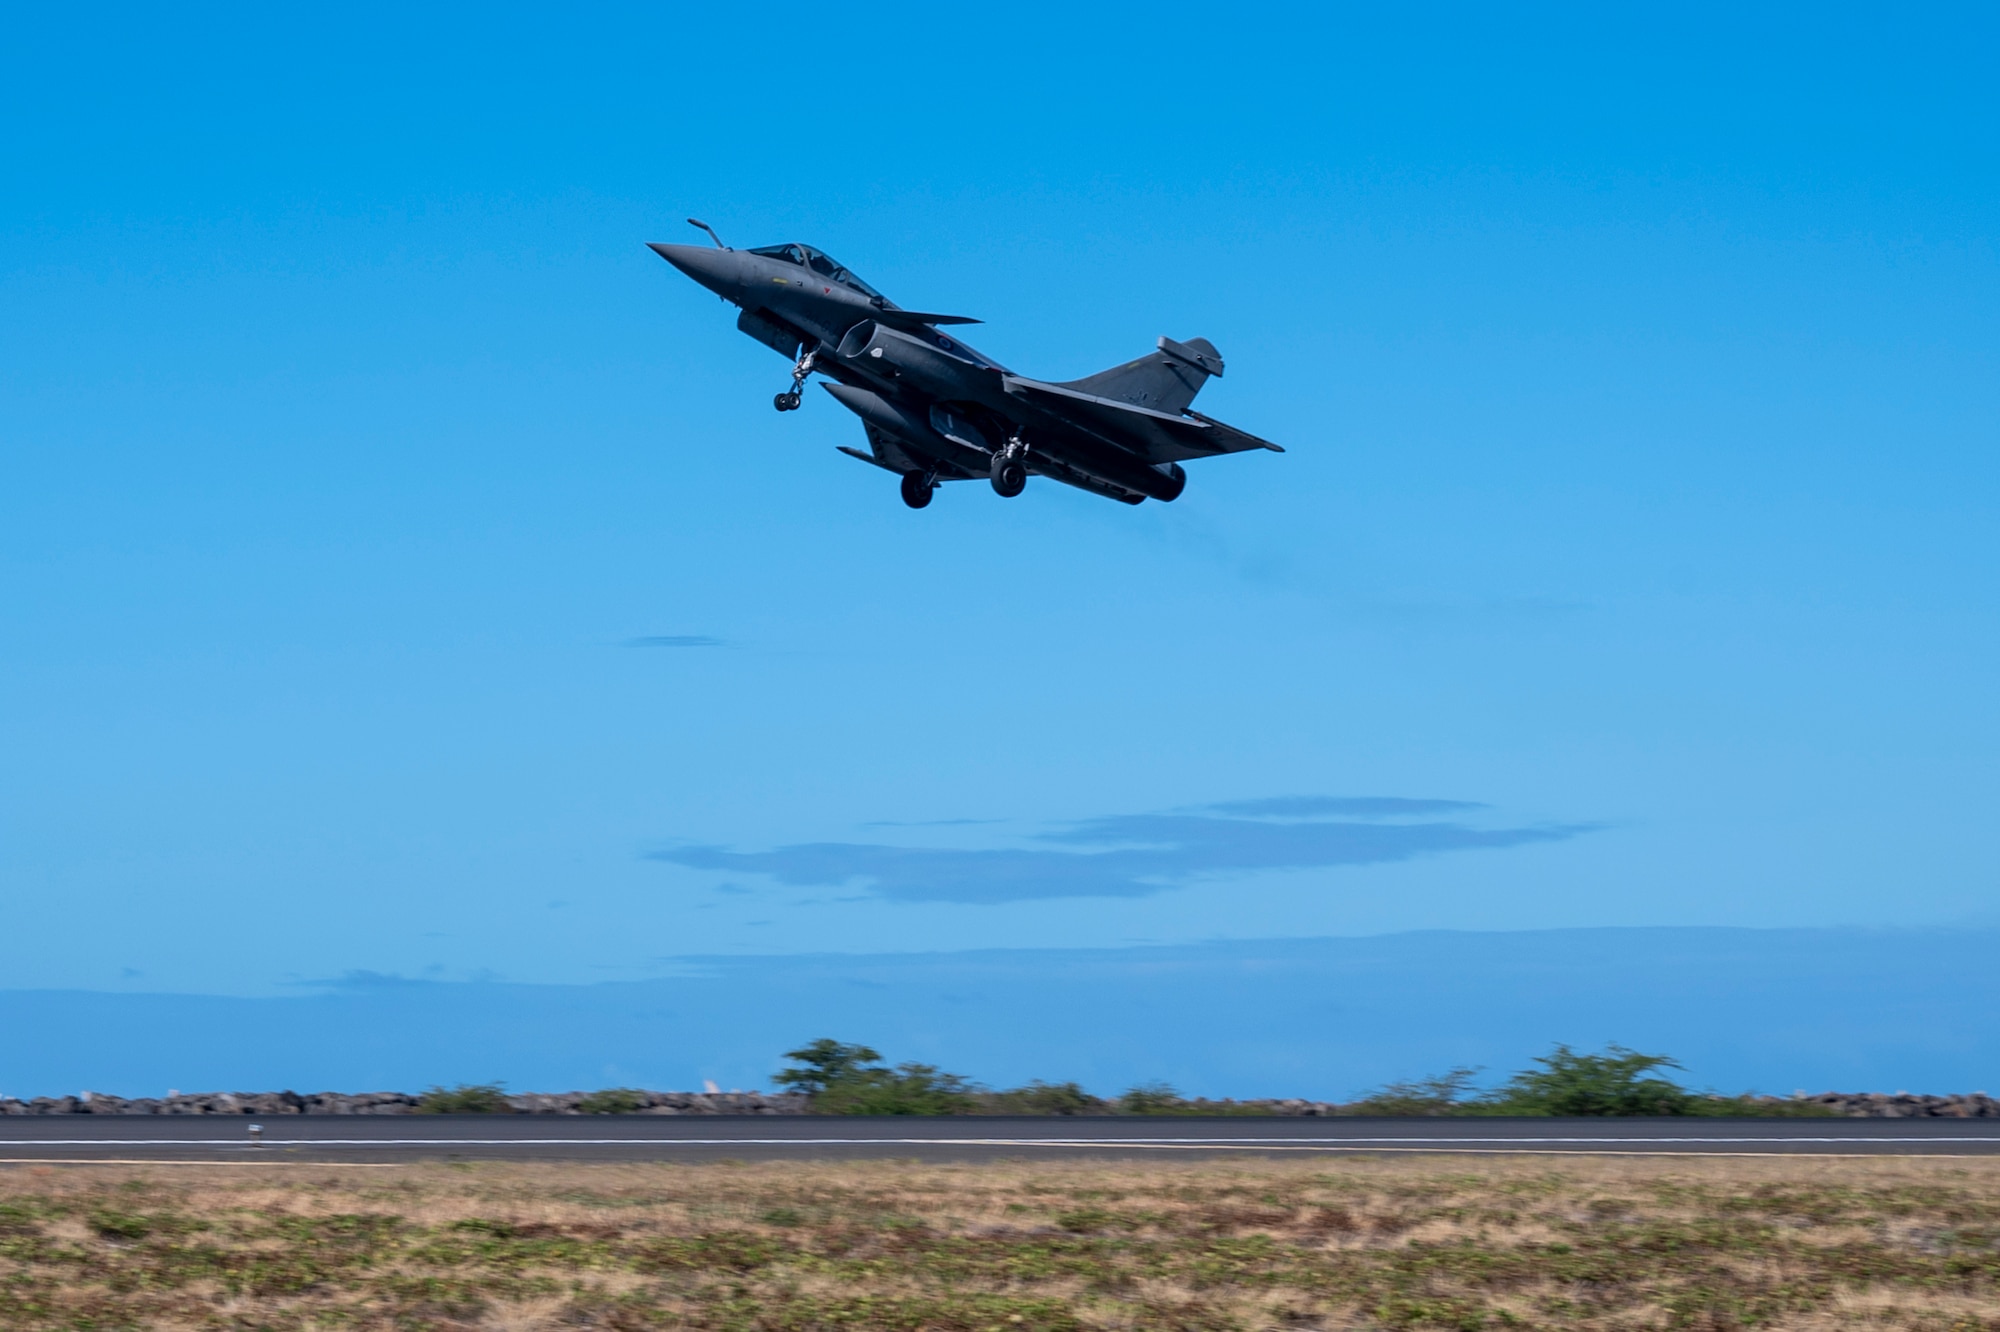 A French Air and Space Force F3-R Rafale takes-off at Honolulu International Airport, Hawaii, June 29, 2021.